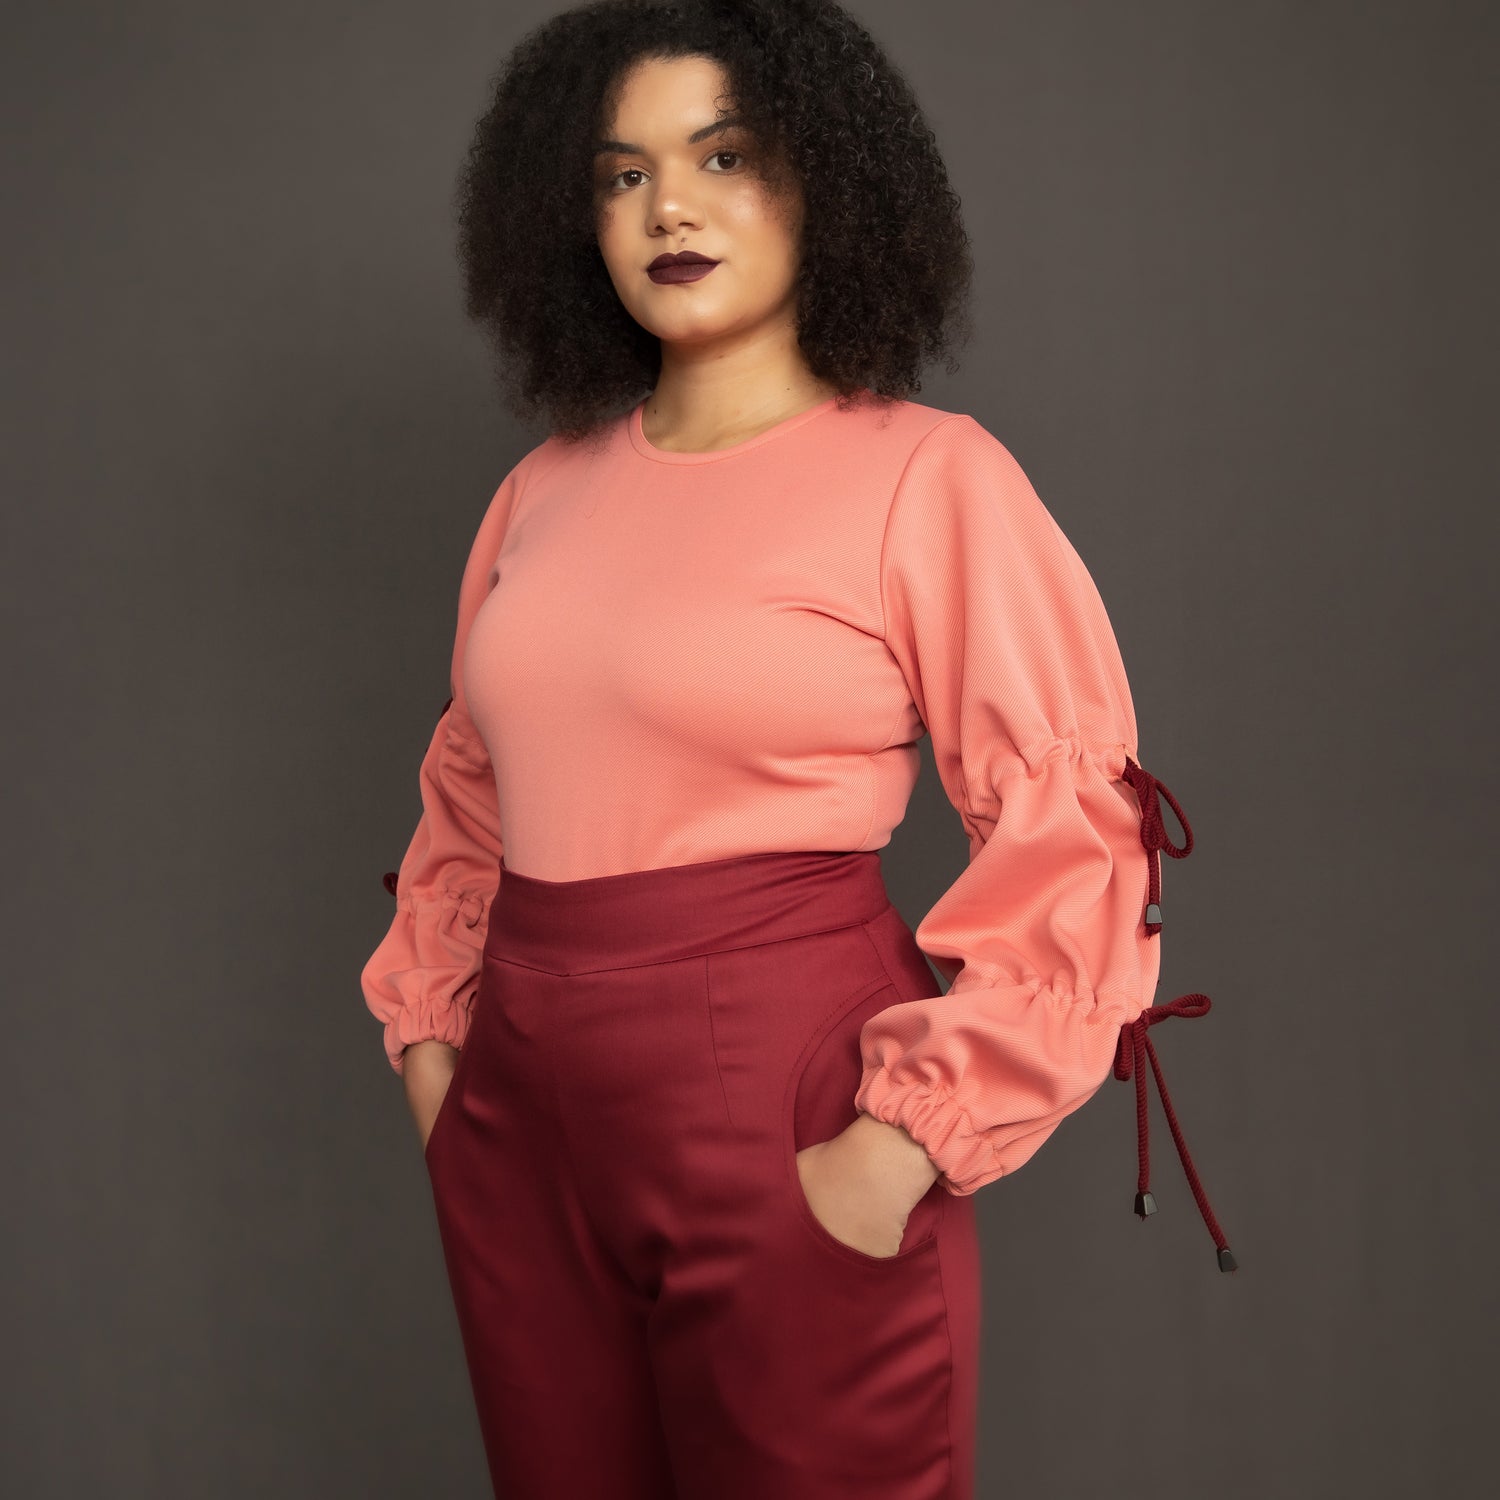 Salmon pink scuba top with drawstring detail on sleeves paired with burgundy trouser